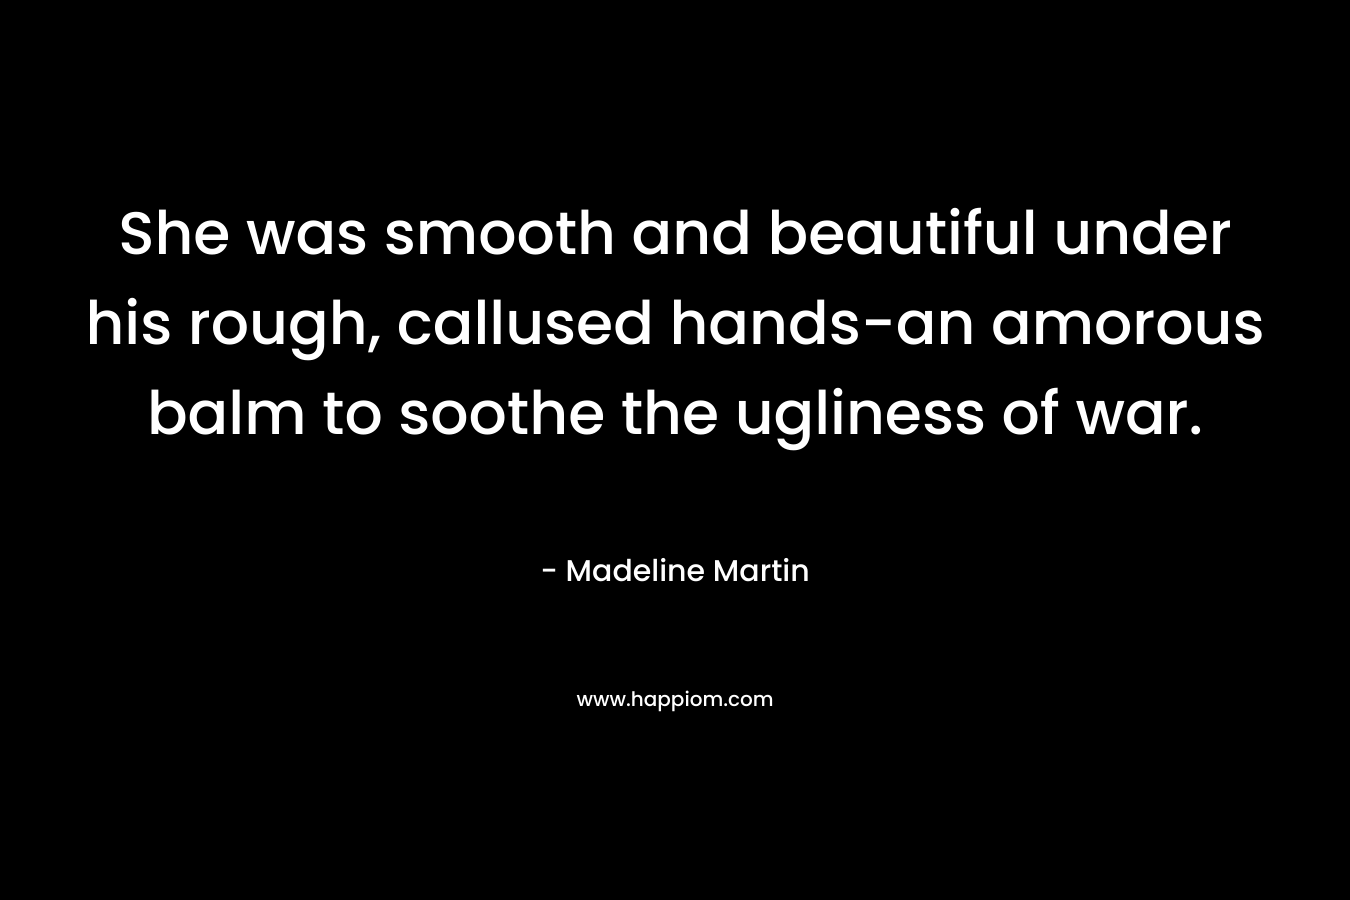 She was smooth and beautiful under his rough, callused hands-an amorous balm to soothe the ugliness of war.